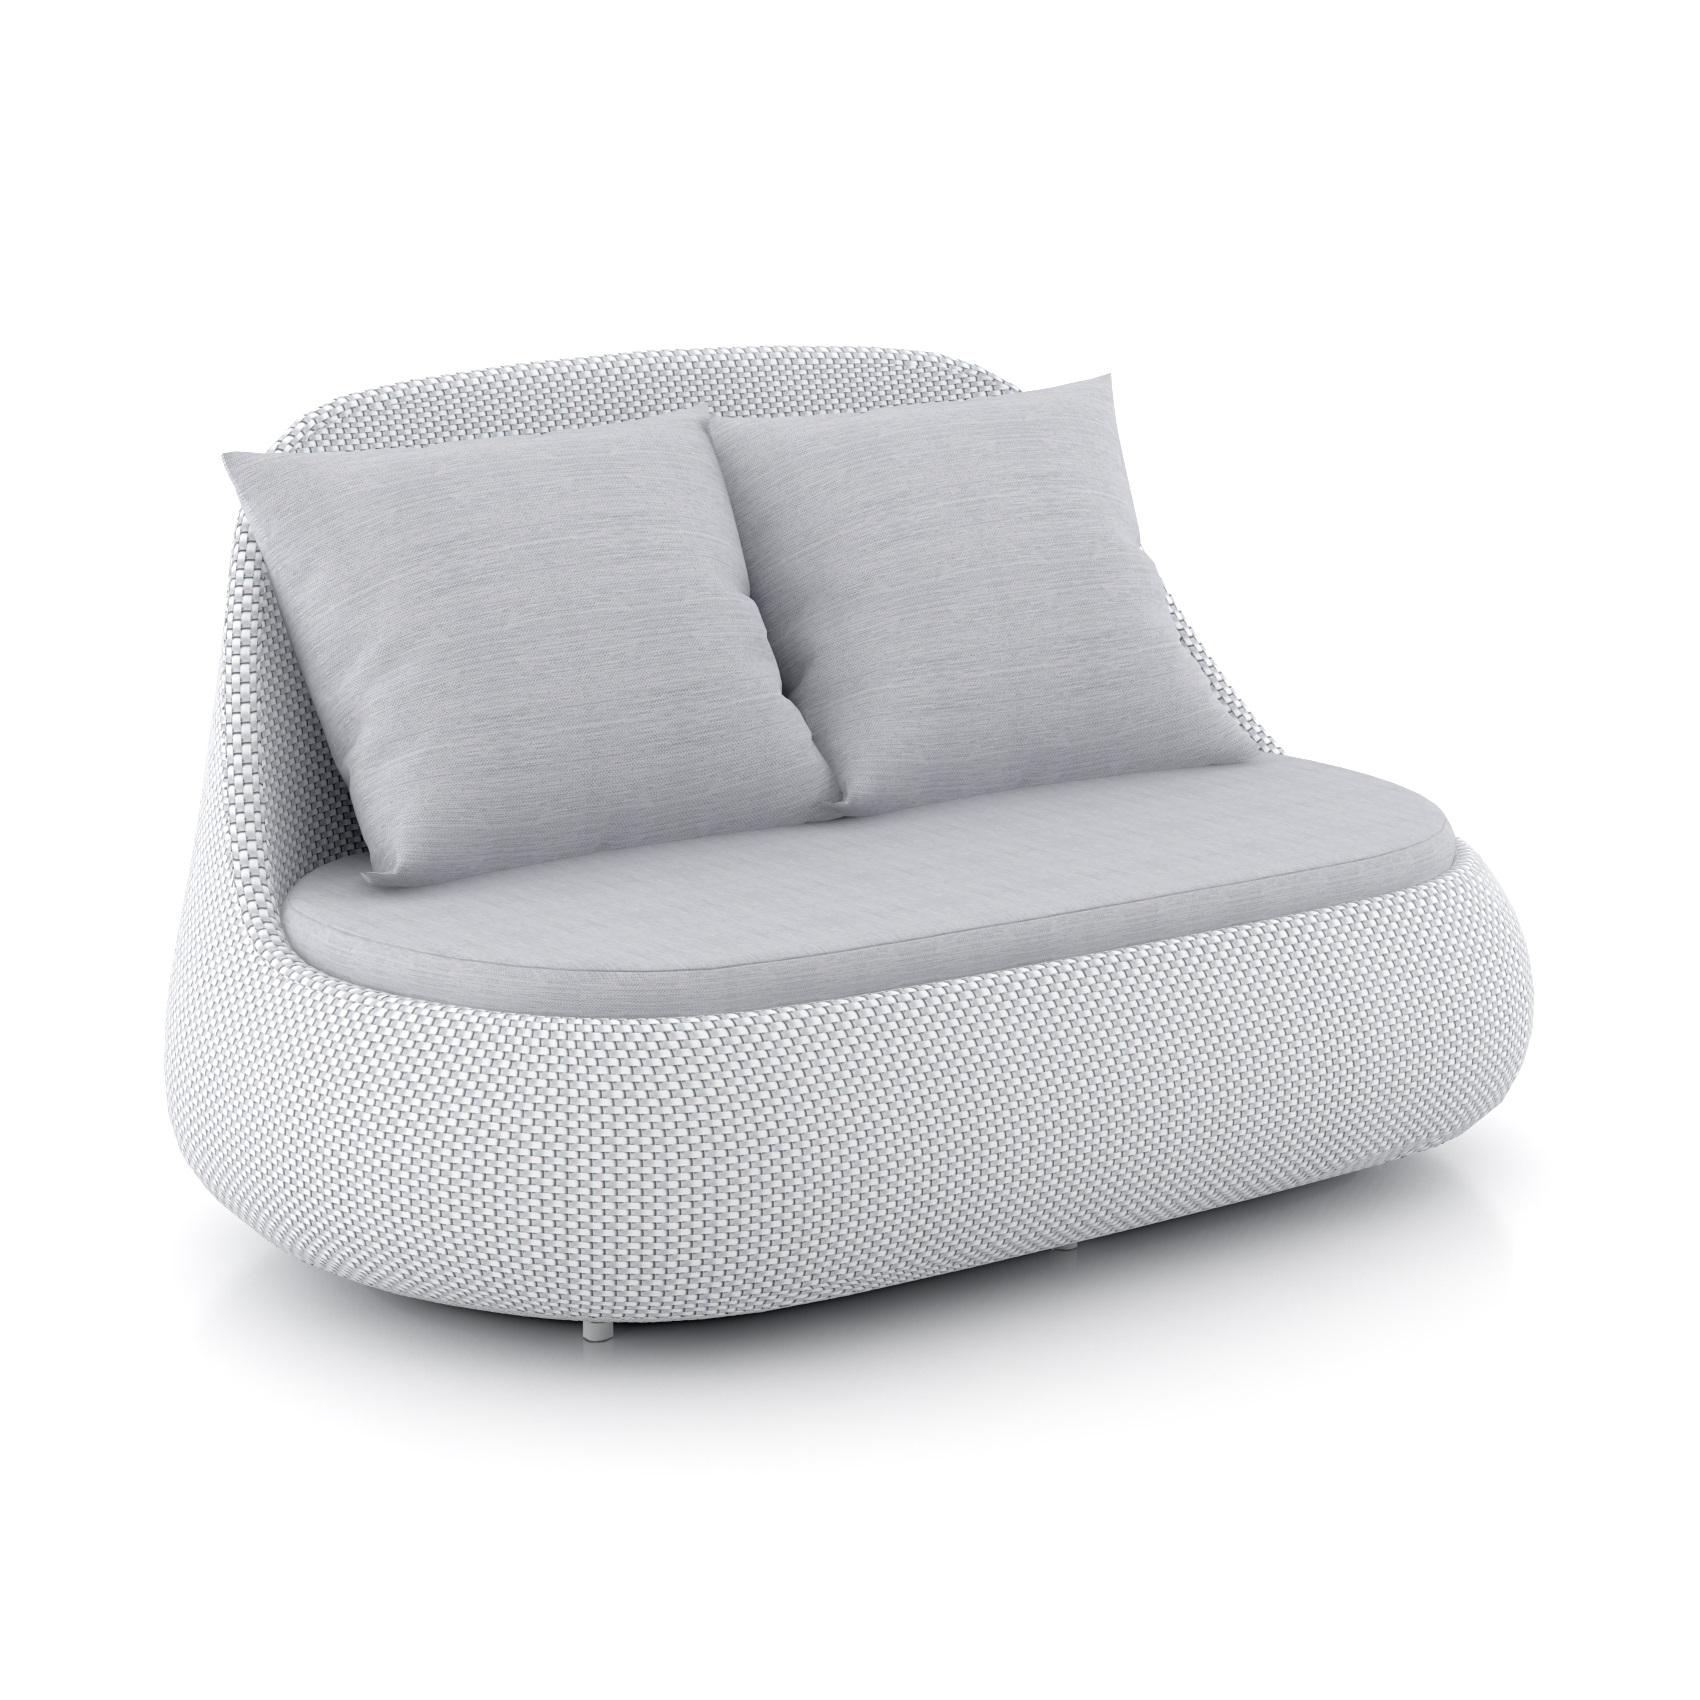 Outdoor 2 Seater Braided Sofa in Silver White Wicker In New Condition For Sale In New York, NY